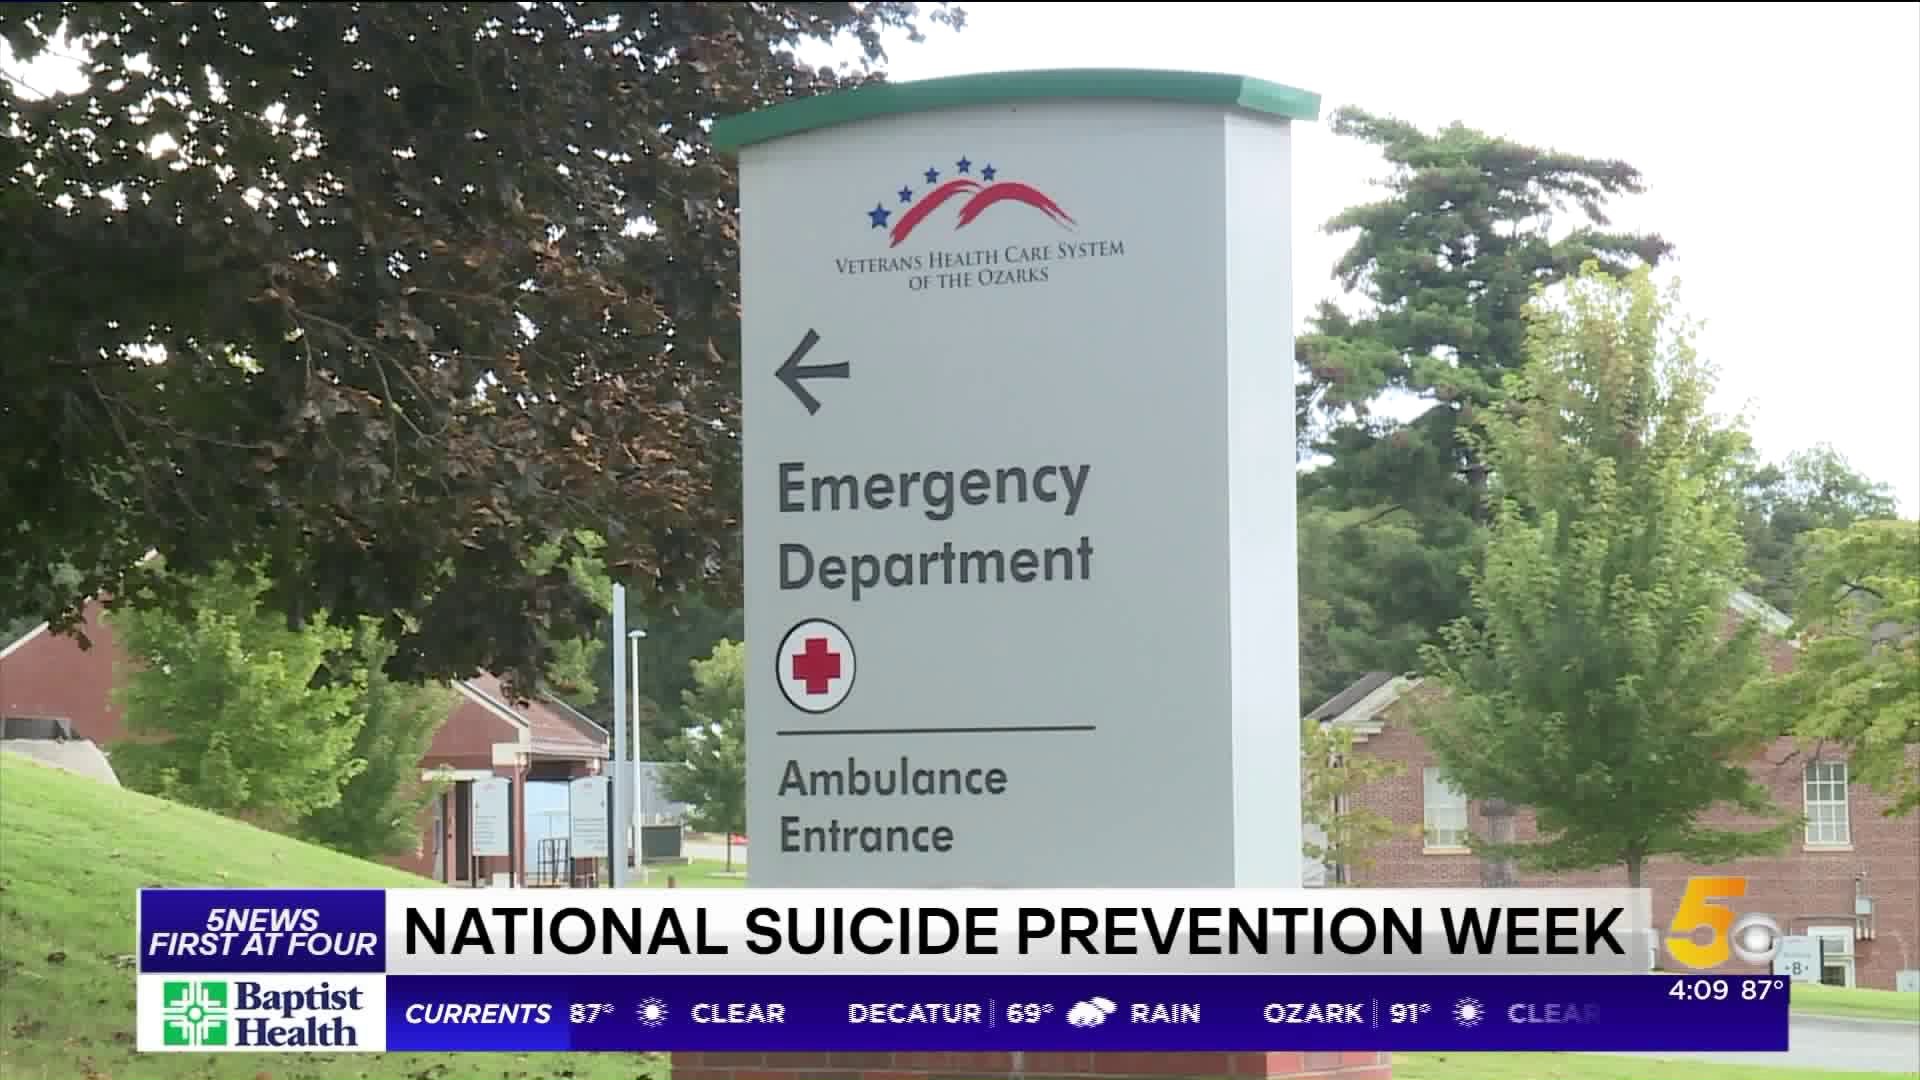 During Suicide Prevention Week, Health System Reminds Veterans Resources Are Available